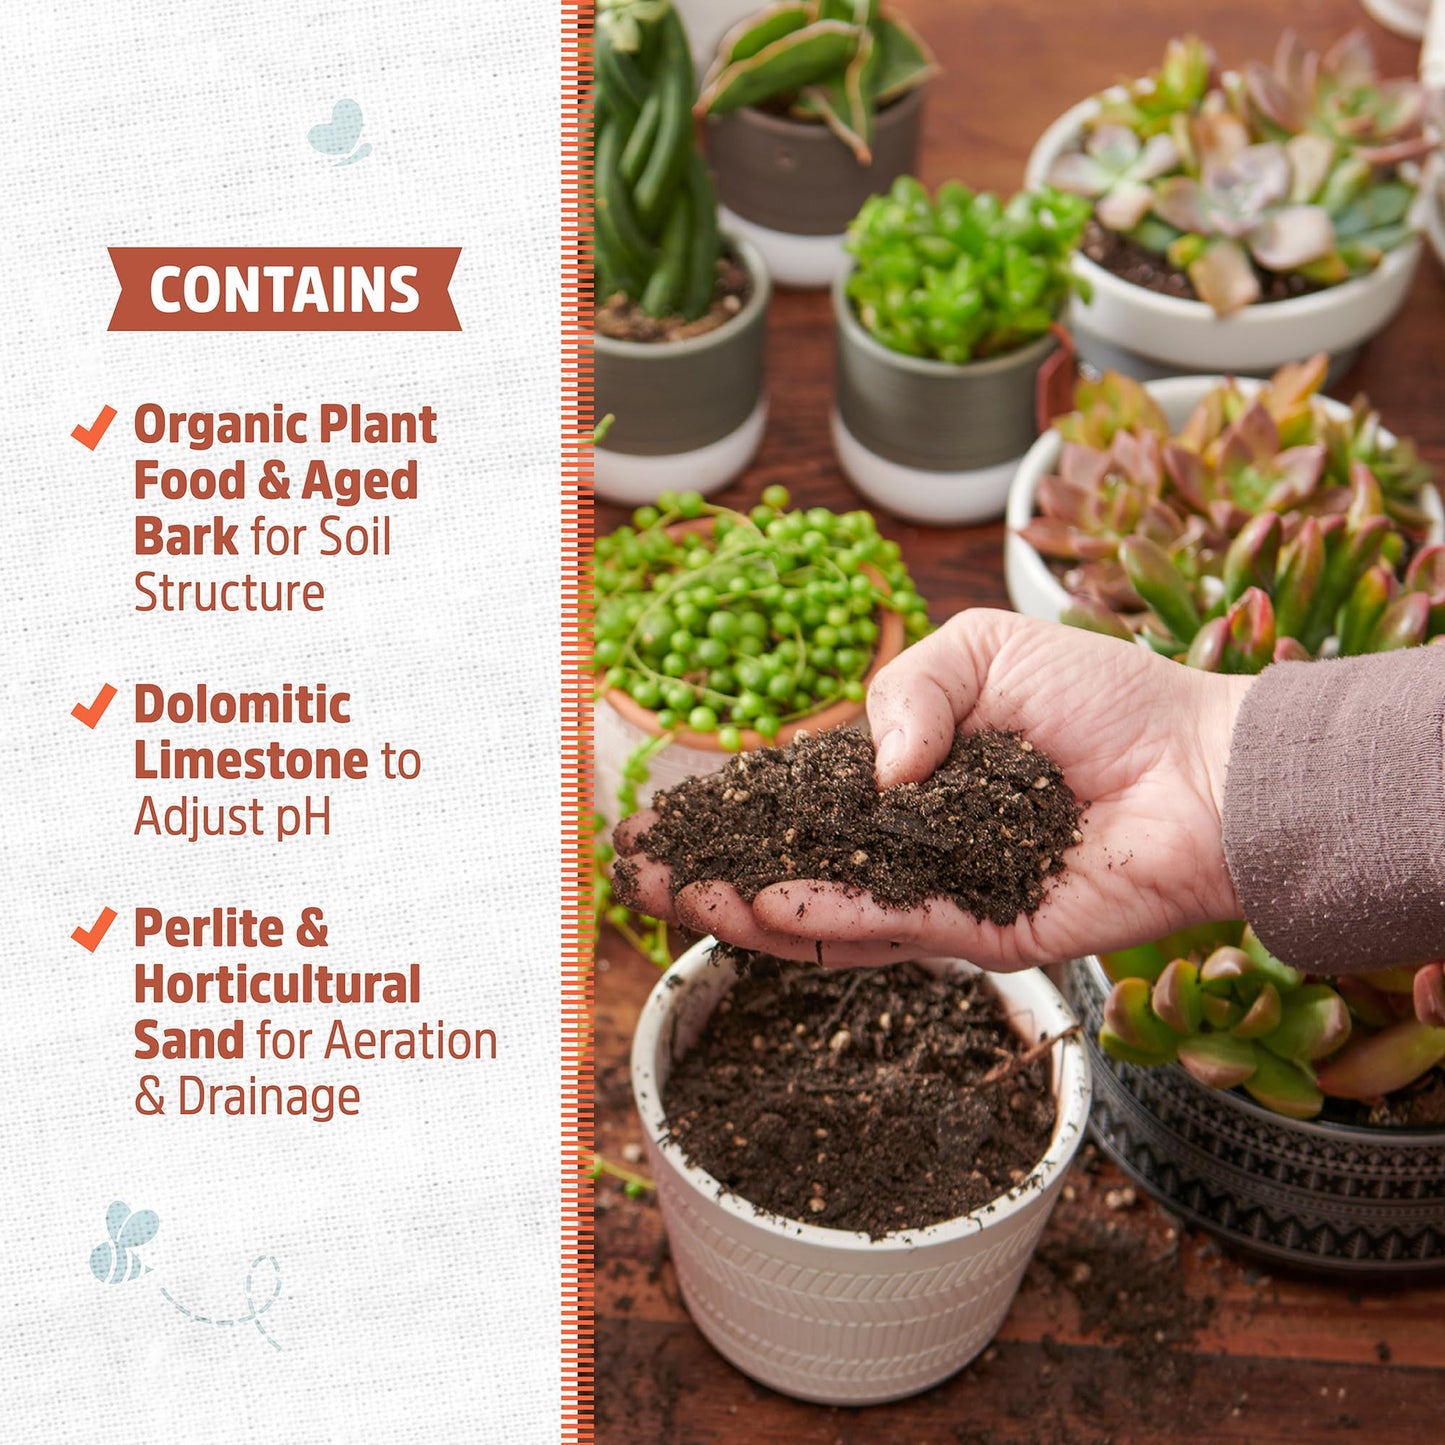 Back to the Roots Succulents & Cacti Potting Mix: Made in The USA (6qt, Pack of 2)